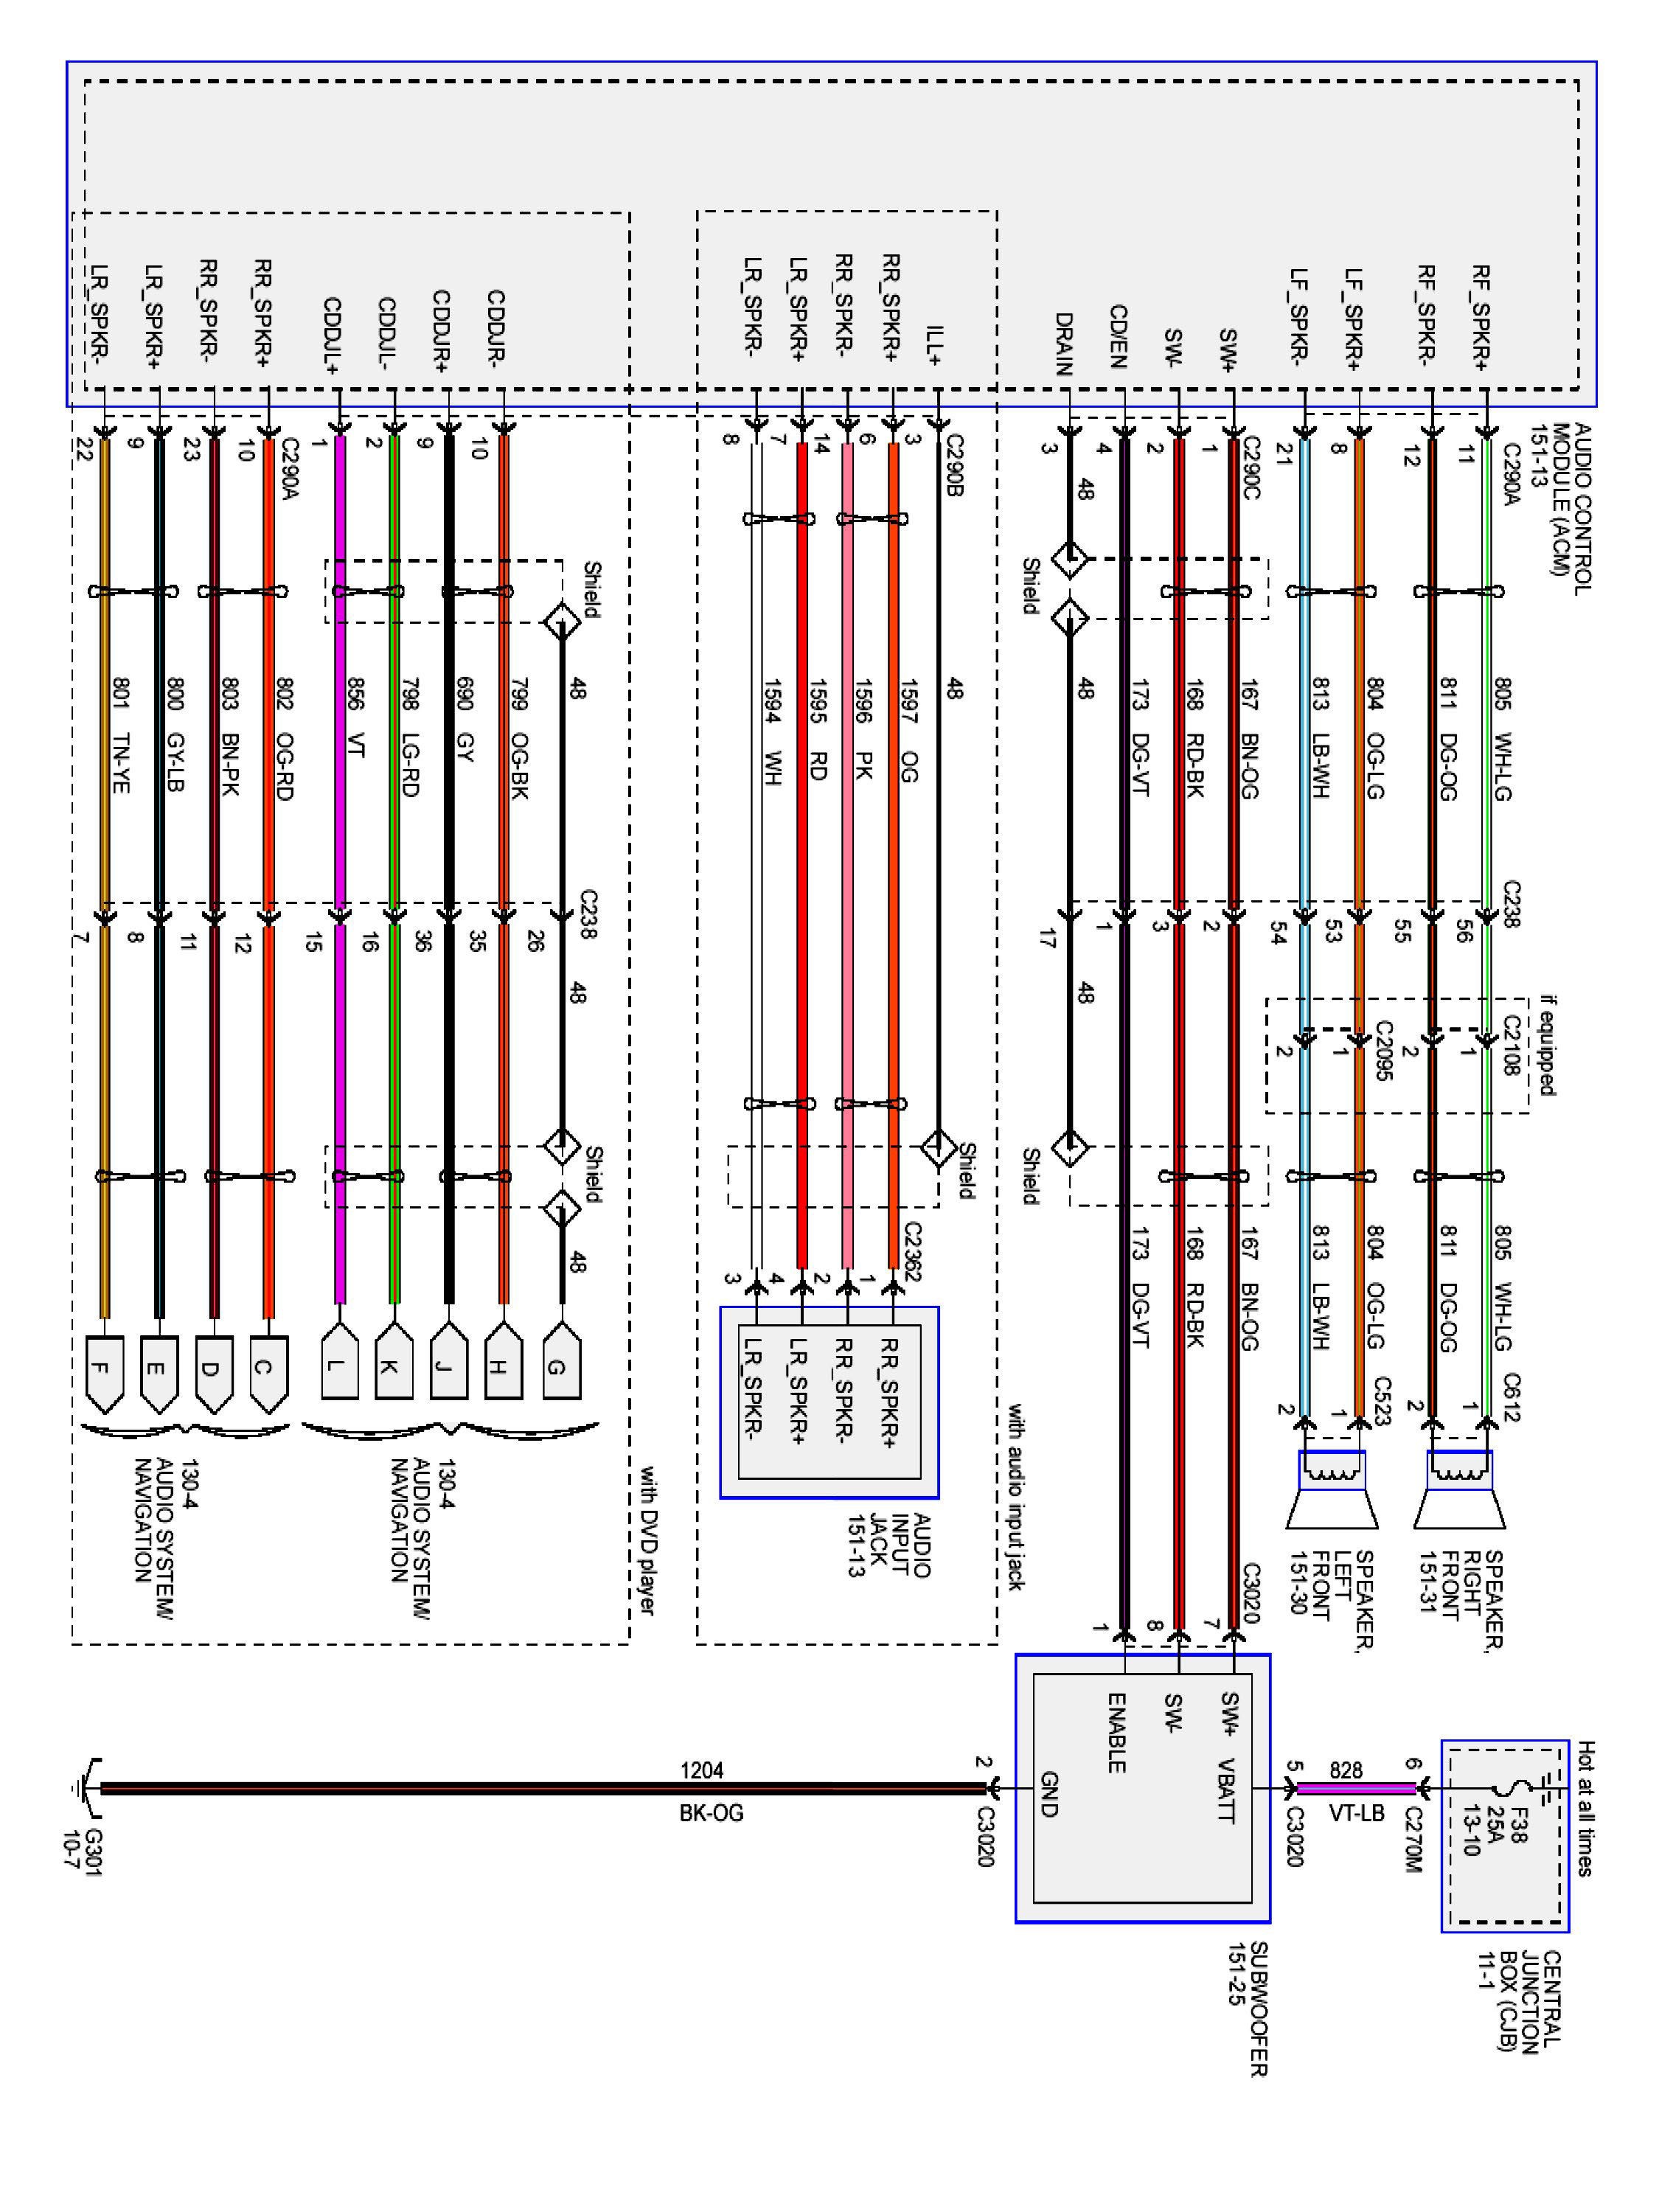 98 ford F150 Wiring Diagram Category Wiring Diagram 11 Of 98 ford F150 Wiring Diagram